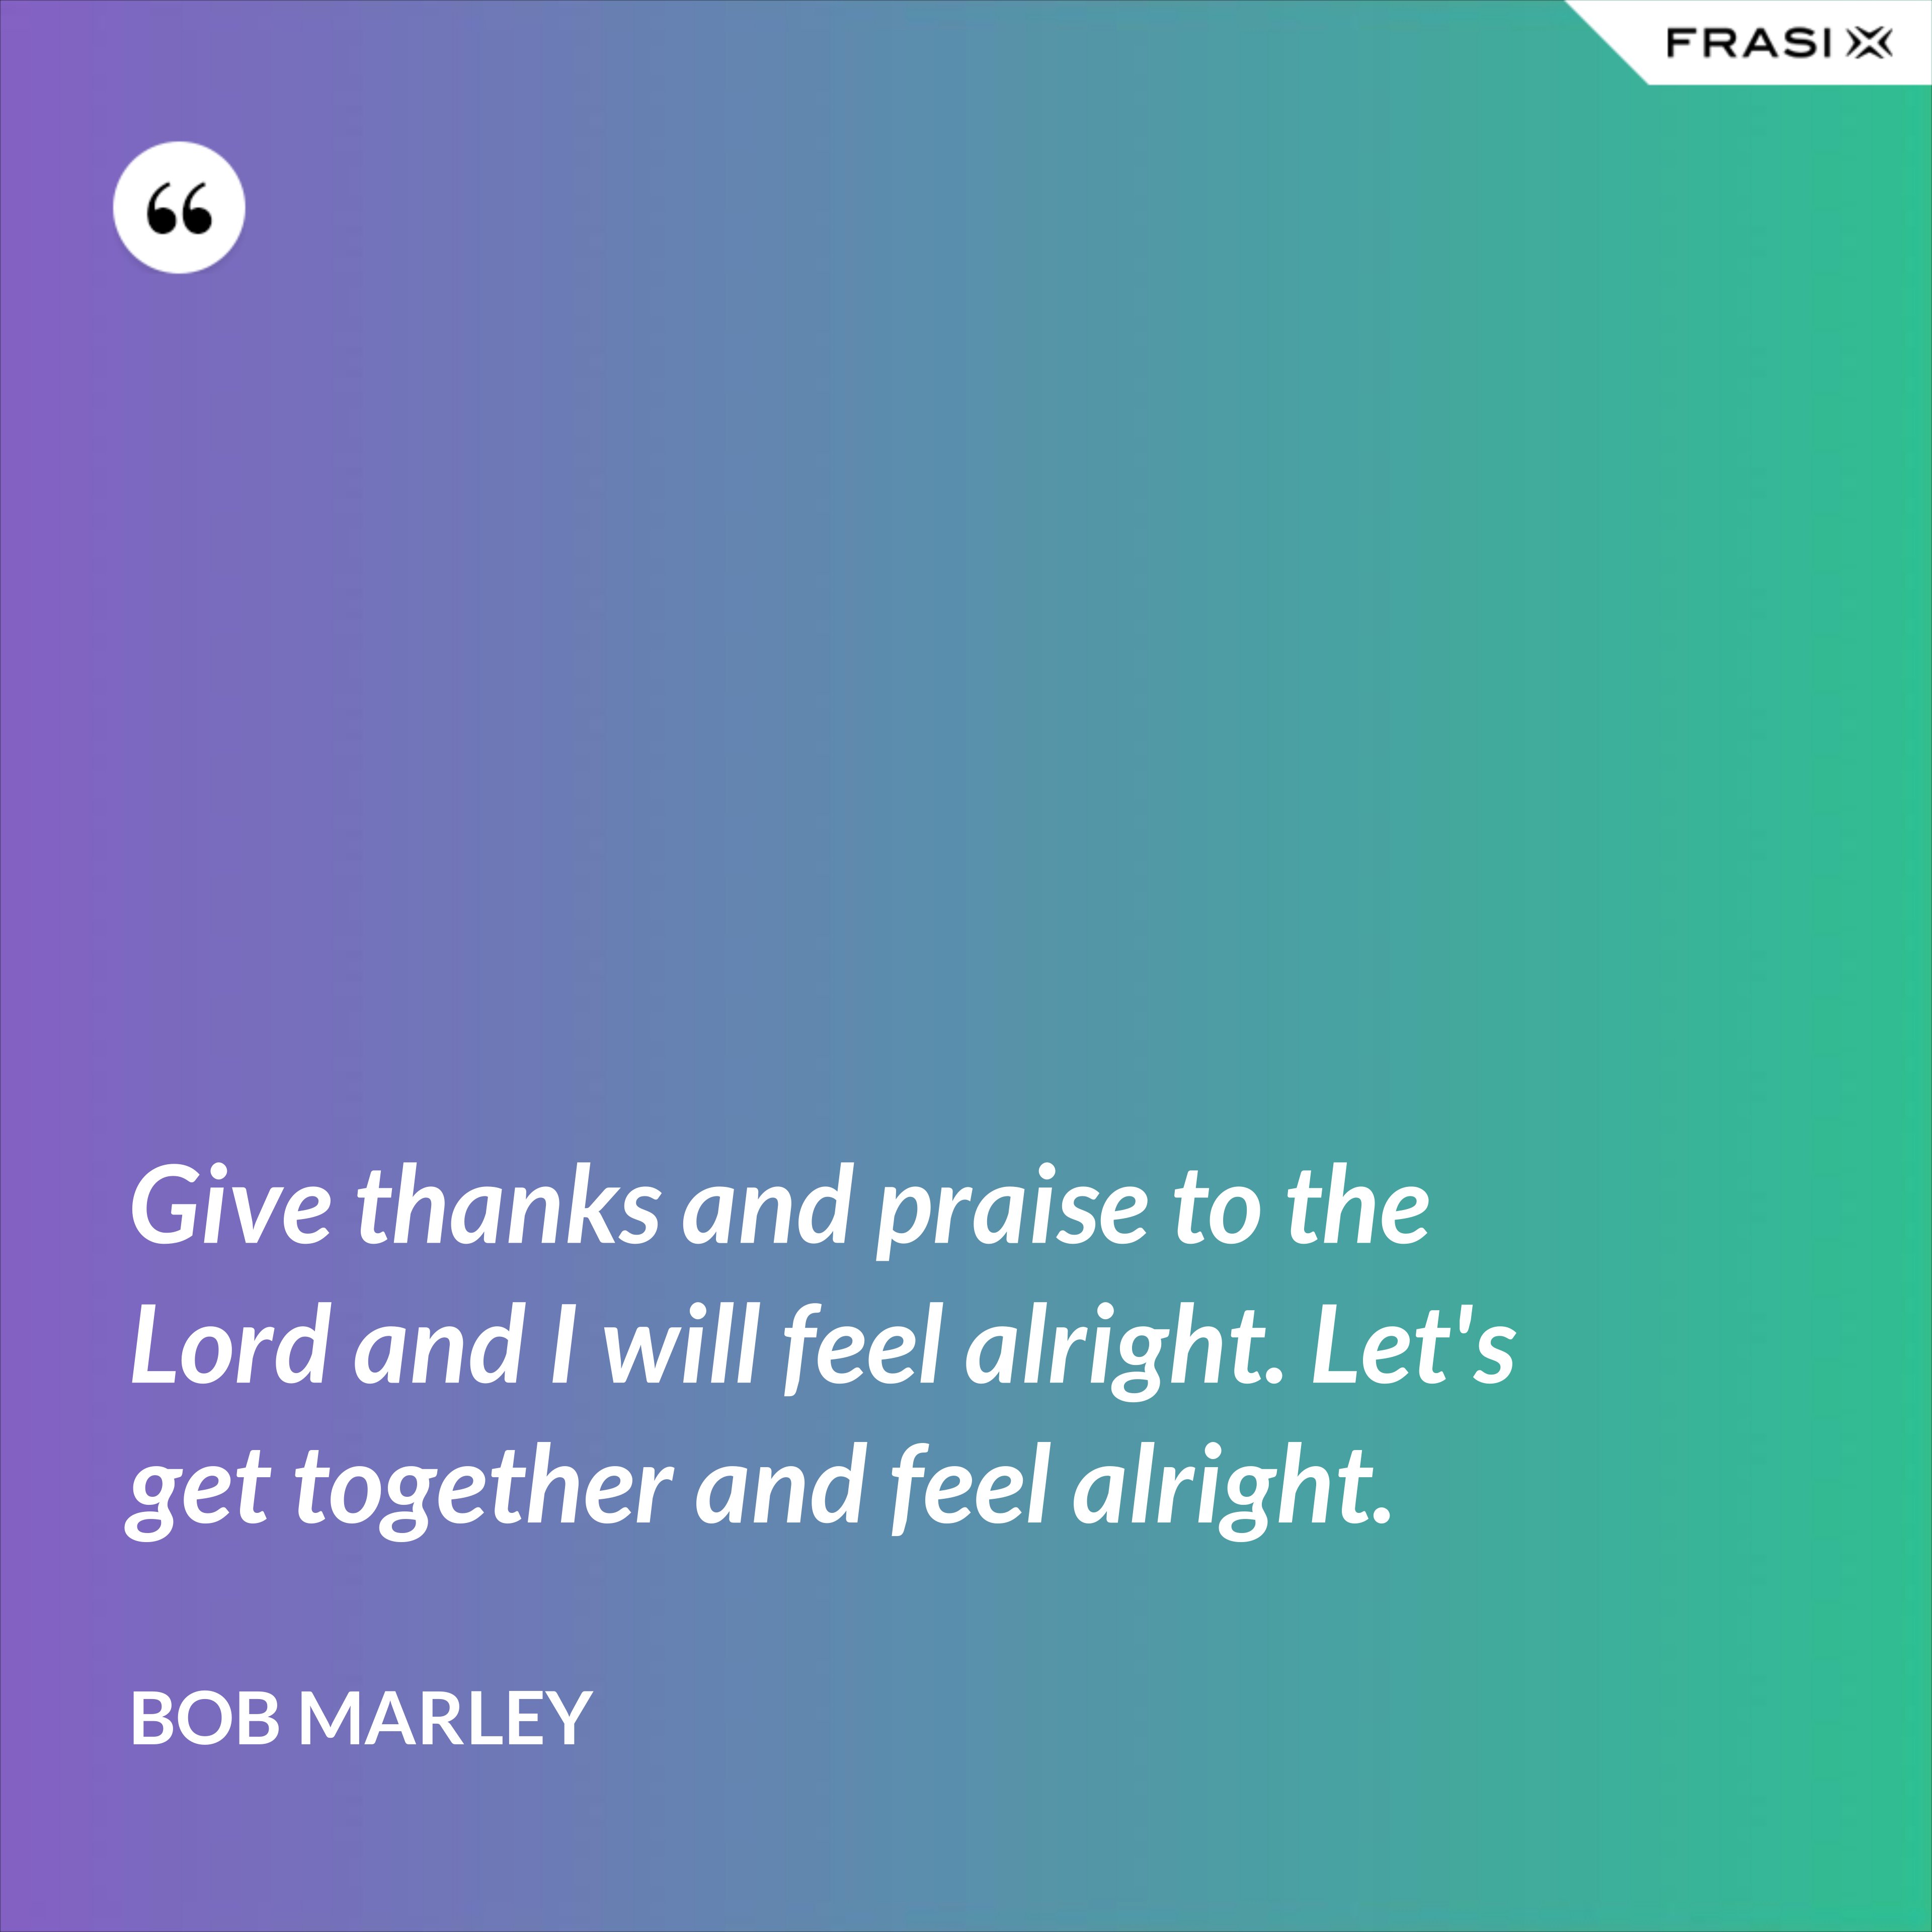 Give thanks and praise to the Lord and I will feel alright. Let's get together and feel alright. - Bob Marley